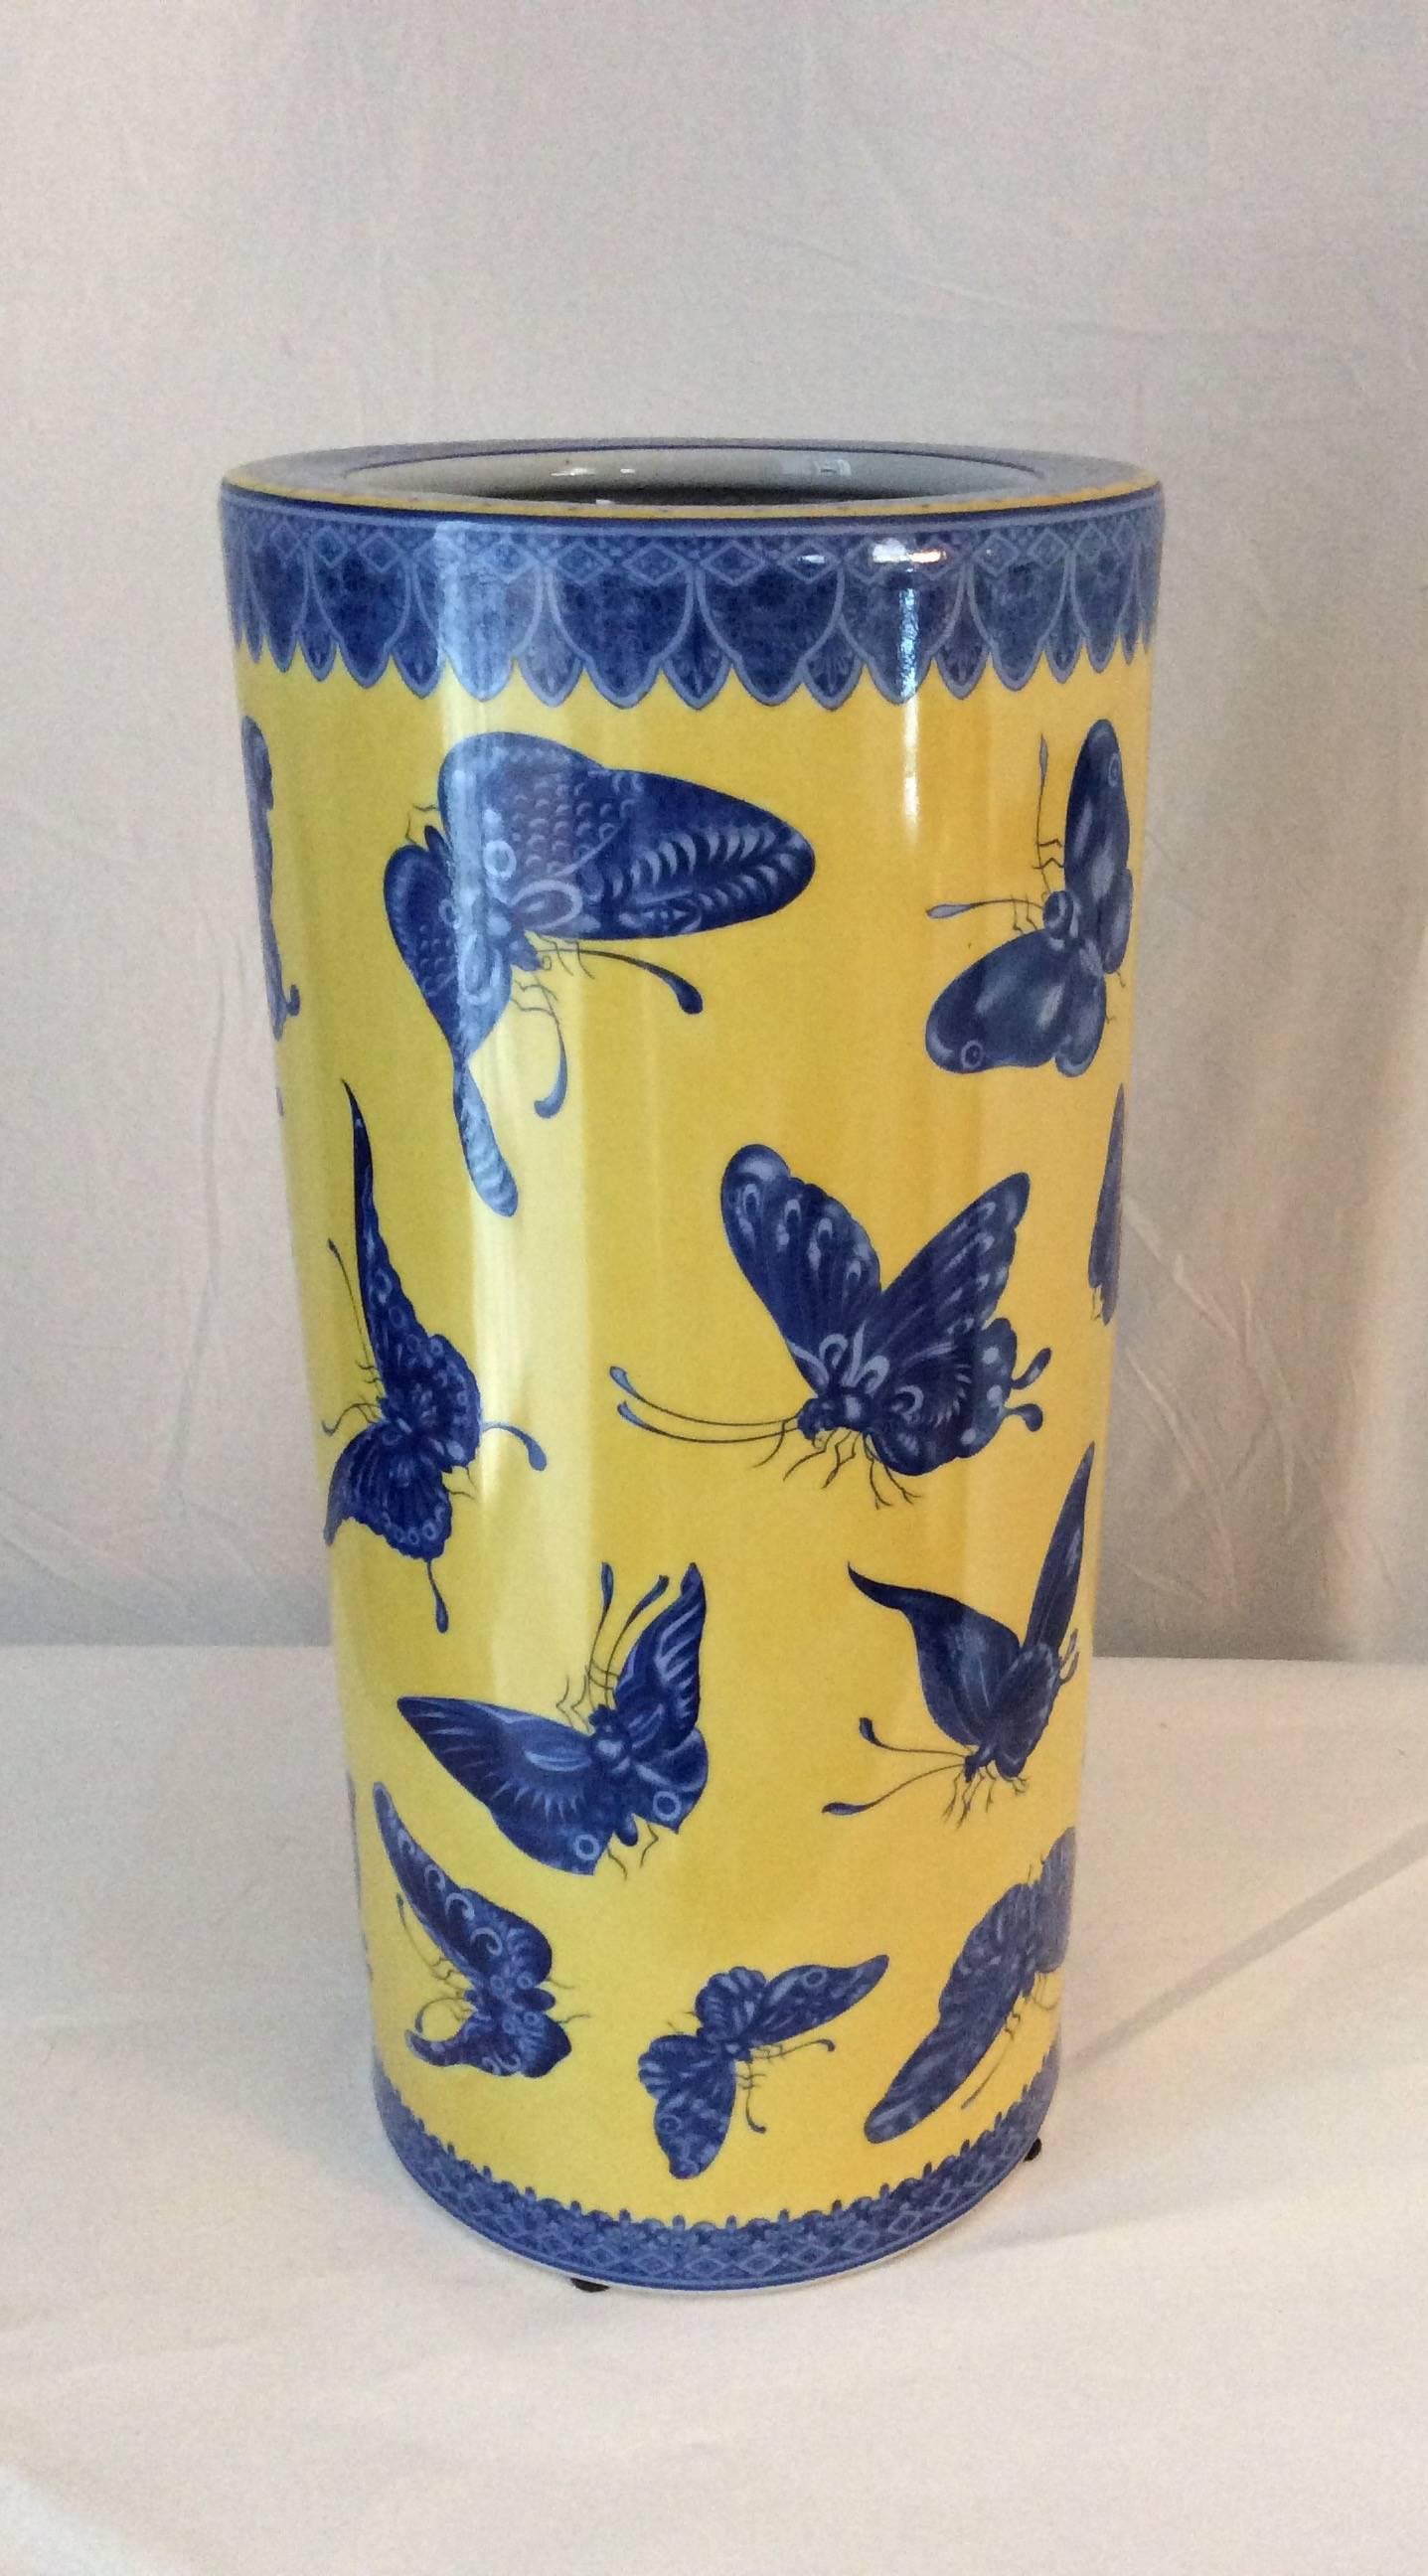 You are looking at a beautiful umbrella stand done in porcelain with a yellow background and stunning transferred butterflies in a cobalt blue color. There is also a accent border on the top and bottom in the same color. The contrast of the colors